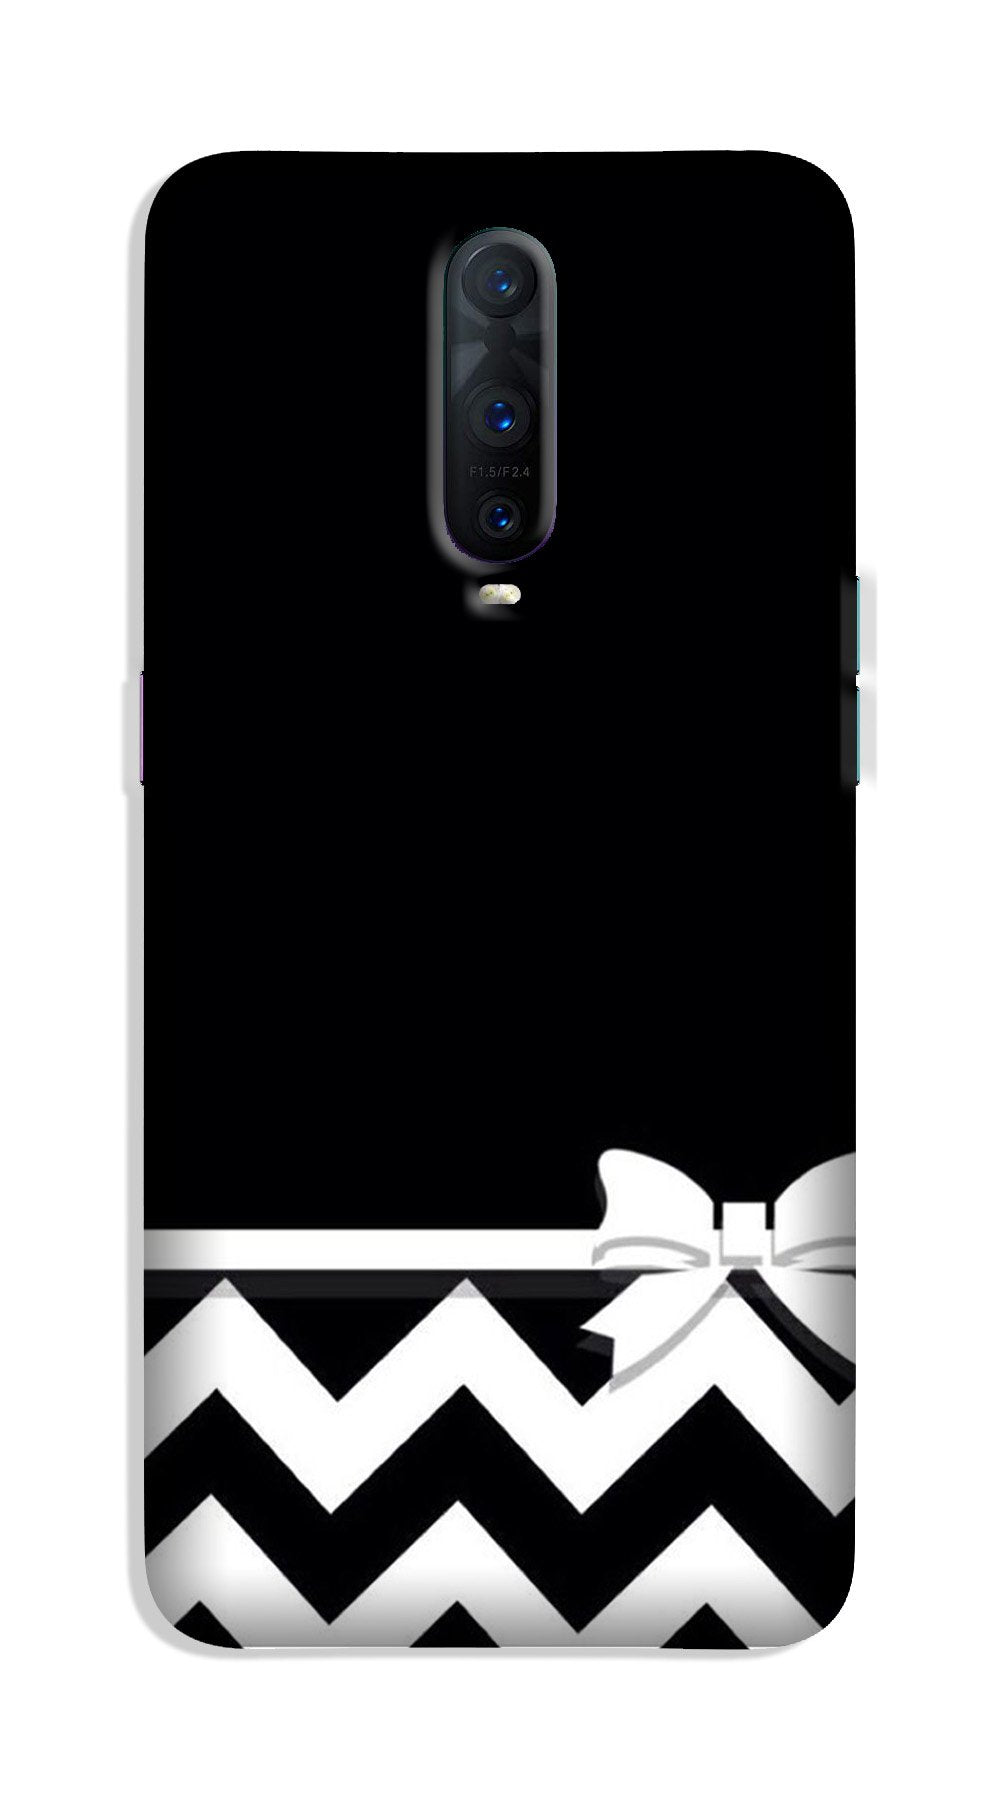 Gift Wrap7 Case for OnePlus 7 Pro